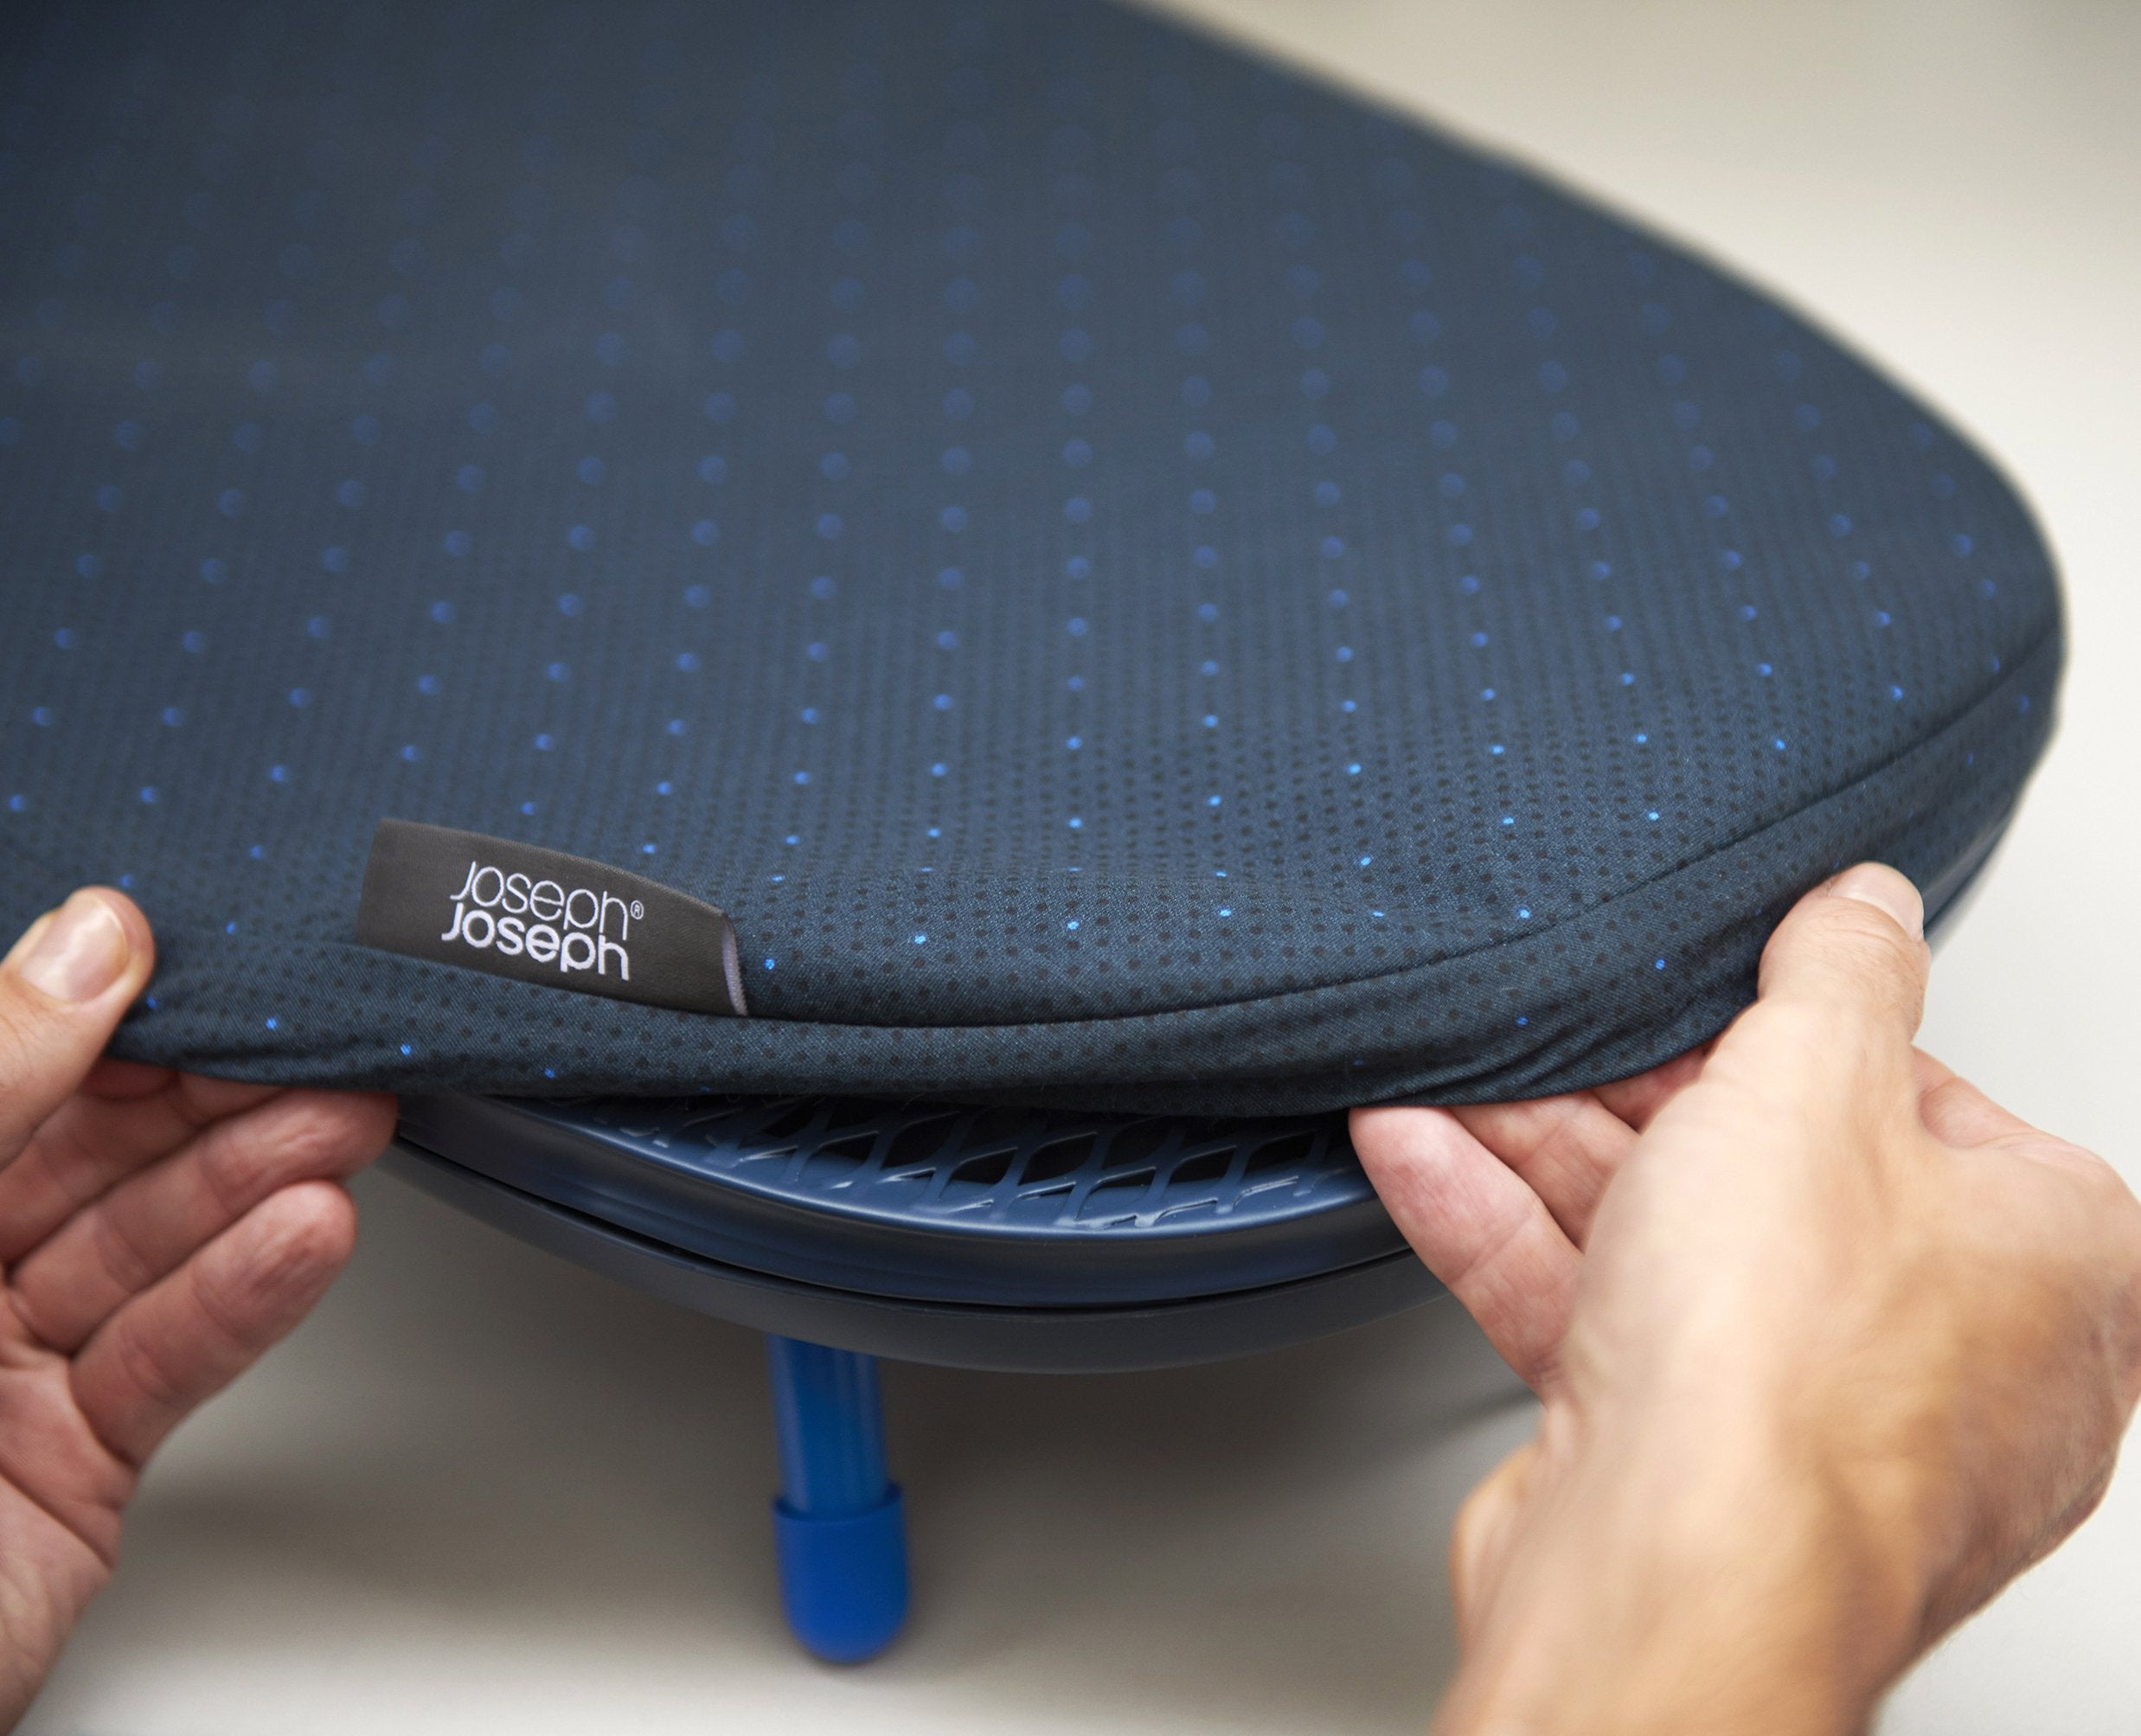 BEON.COM.AU Product Details Designed to cope with larger volumes of ironing or for use with steam generator irons, this condensed board takes ironing convenience to whole new level with its innovative design and advanced, multi-layer cover with DripLock™ Technology.  Compact folding design Integrated iron st... Joseph Joseph at BEON.COM.AU